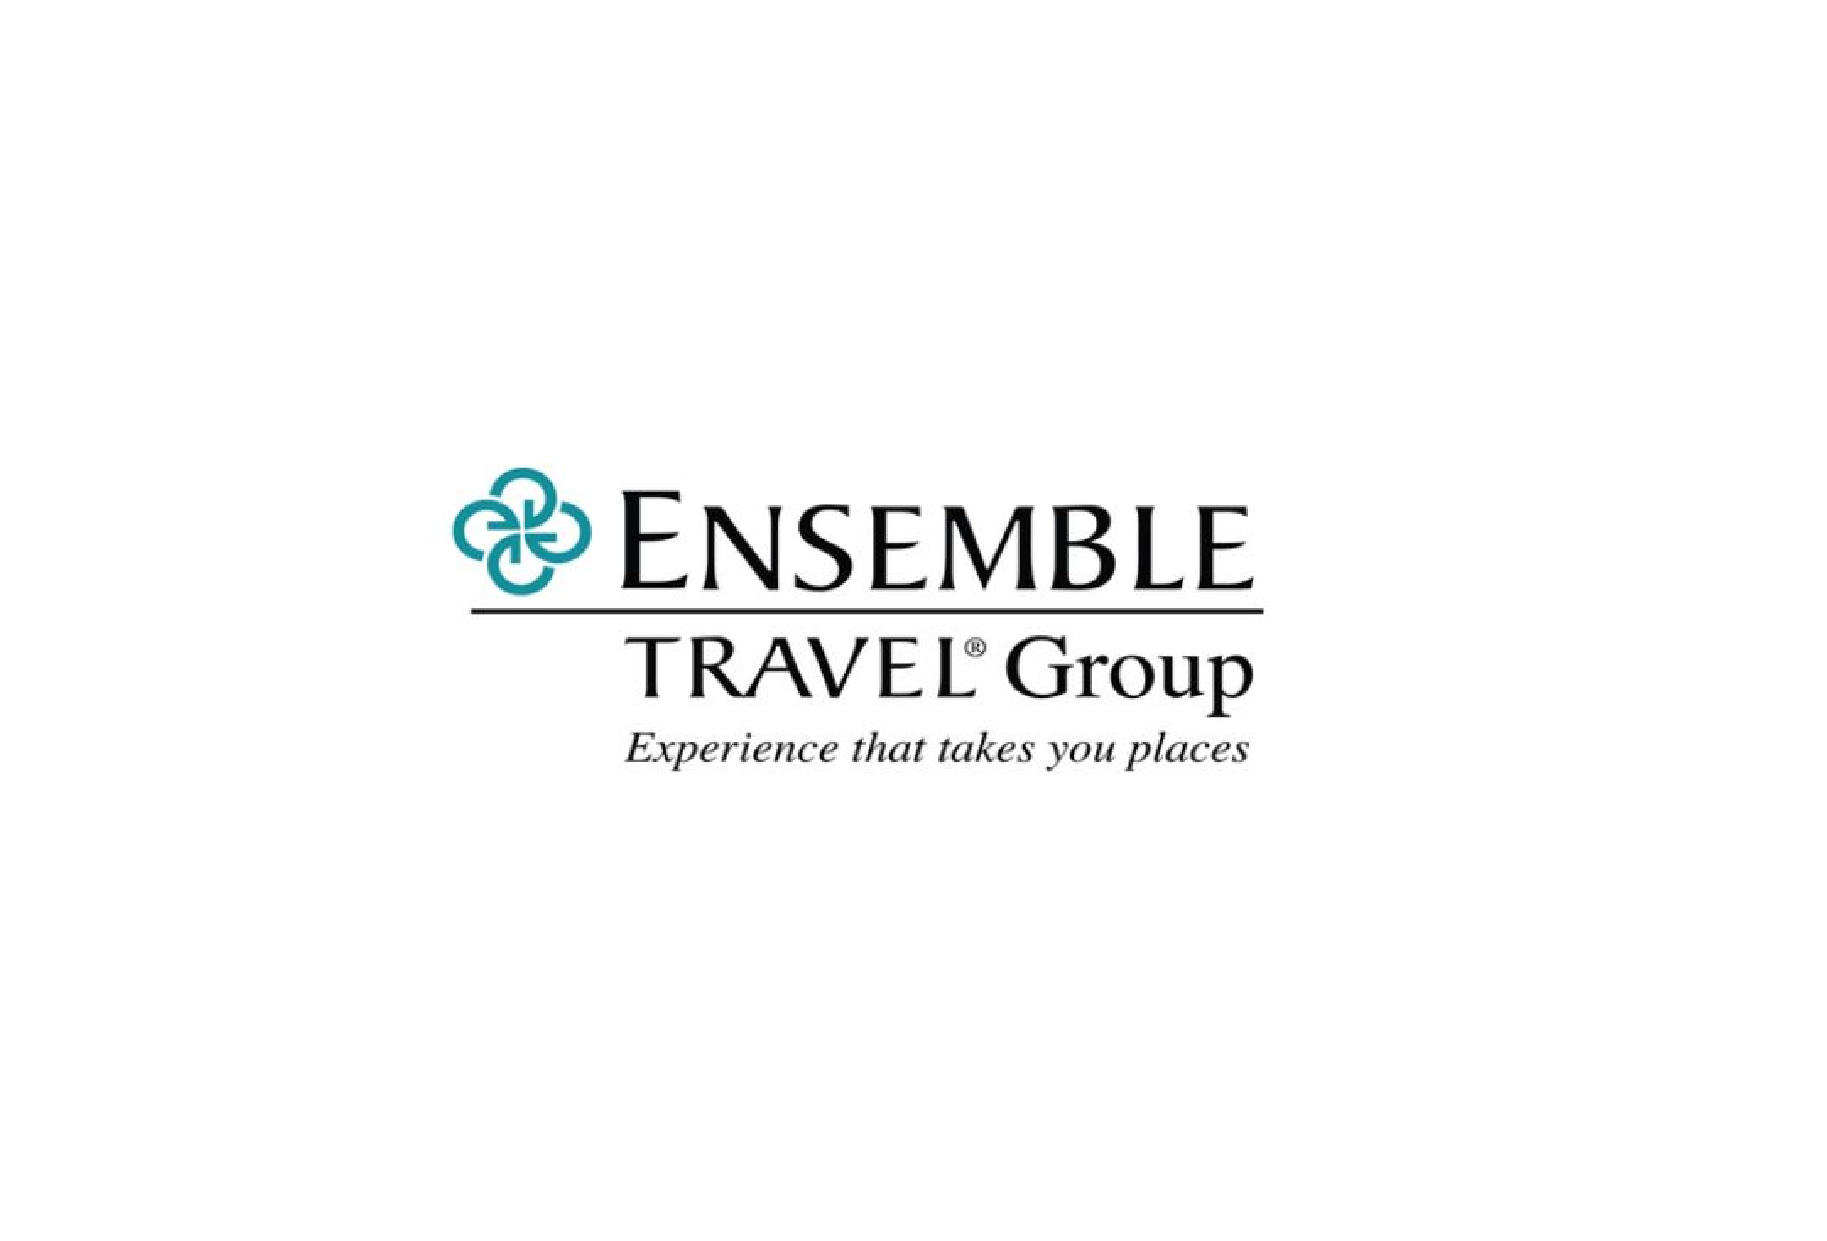 Parent Company of Travel Edge, Ensemble Board Agree to Acquisition Deal